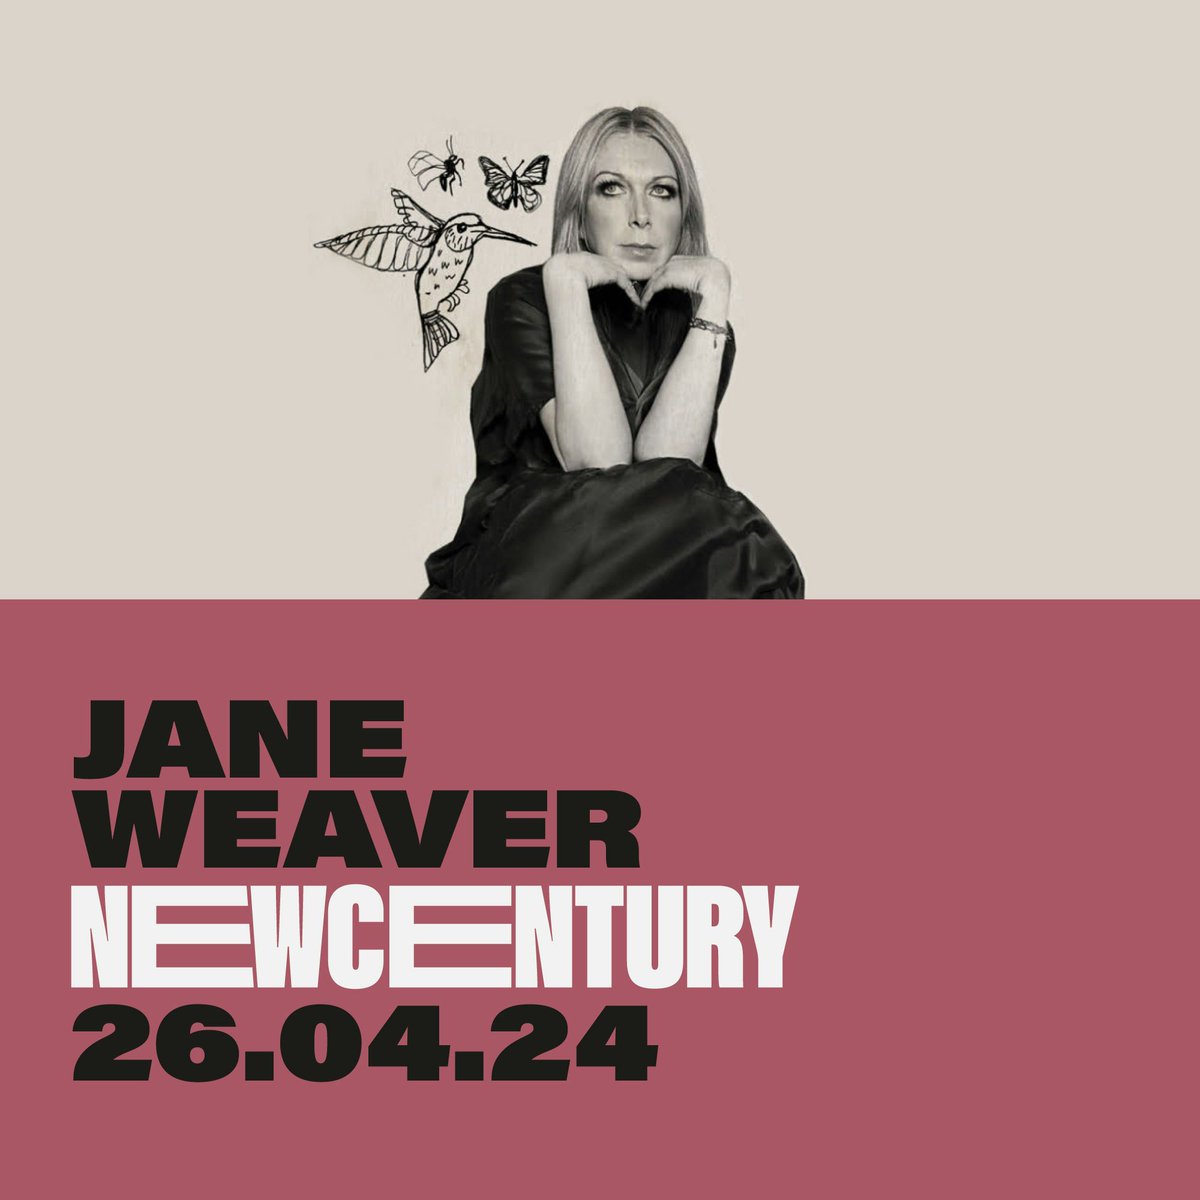 .@HALOMAUD into @JanelWeaver on @sohoradio with the @HeavenlyJukebox <3 It's the tour we have been waiting for! Starting this week with a home-town show @NCHMCR on Friday night @nowwave.